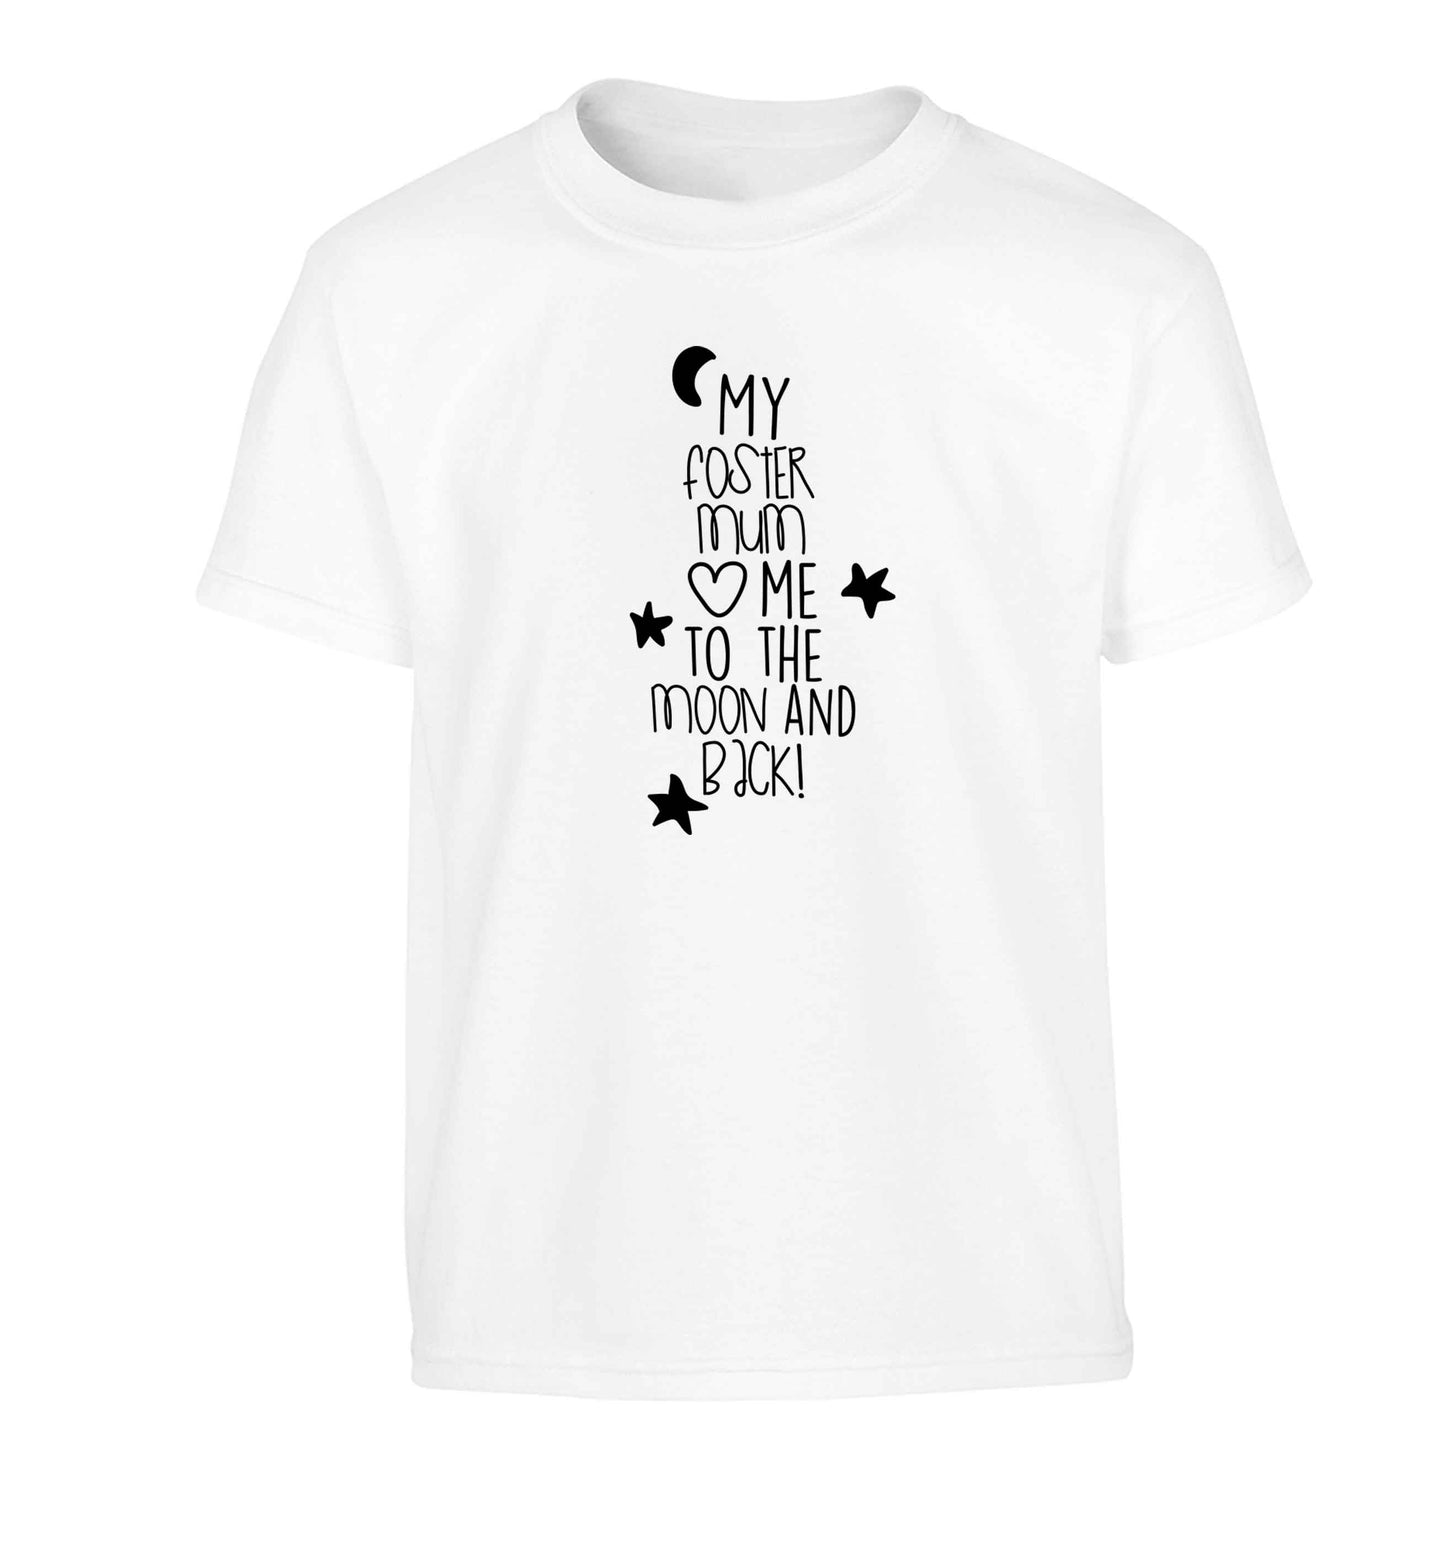 My foster mum loves me to the moon and back Children's white Tshirt 12-13 Years